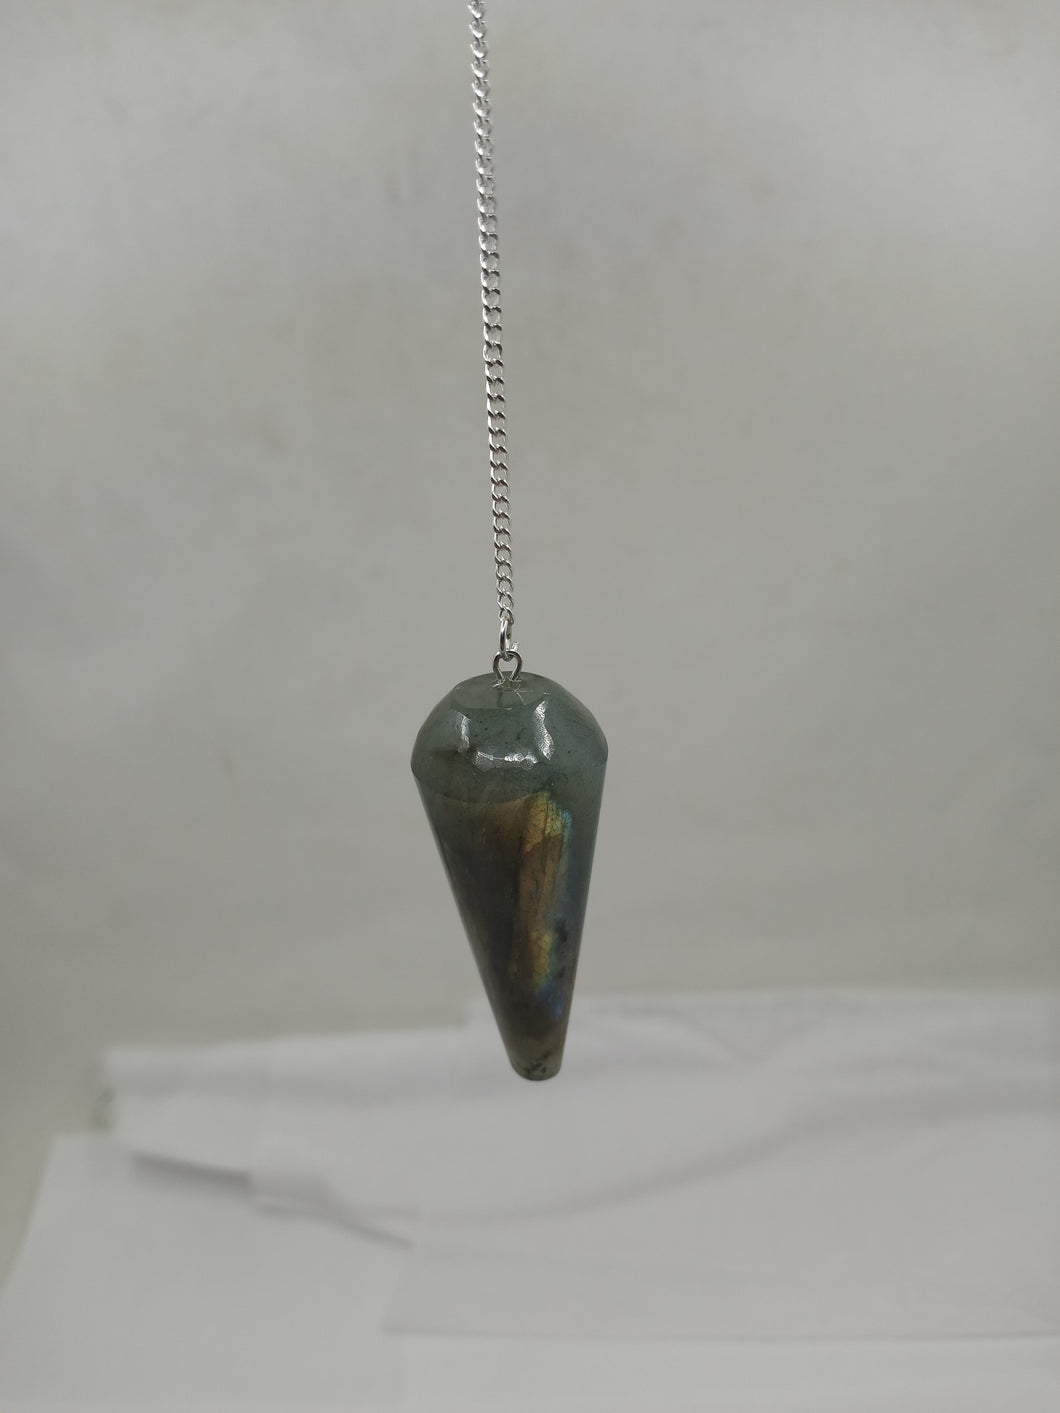 A beautiful labradorite rounded pendulum elegantly hangs from a silver chain on a serene white background.